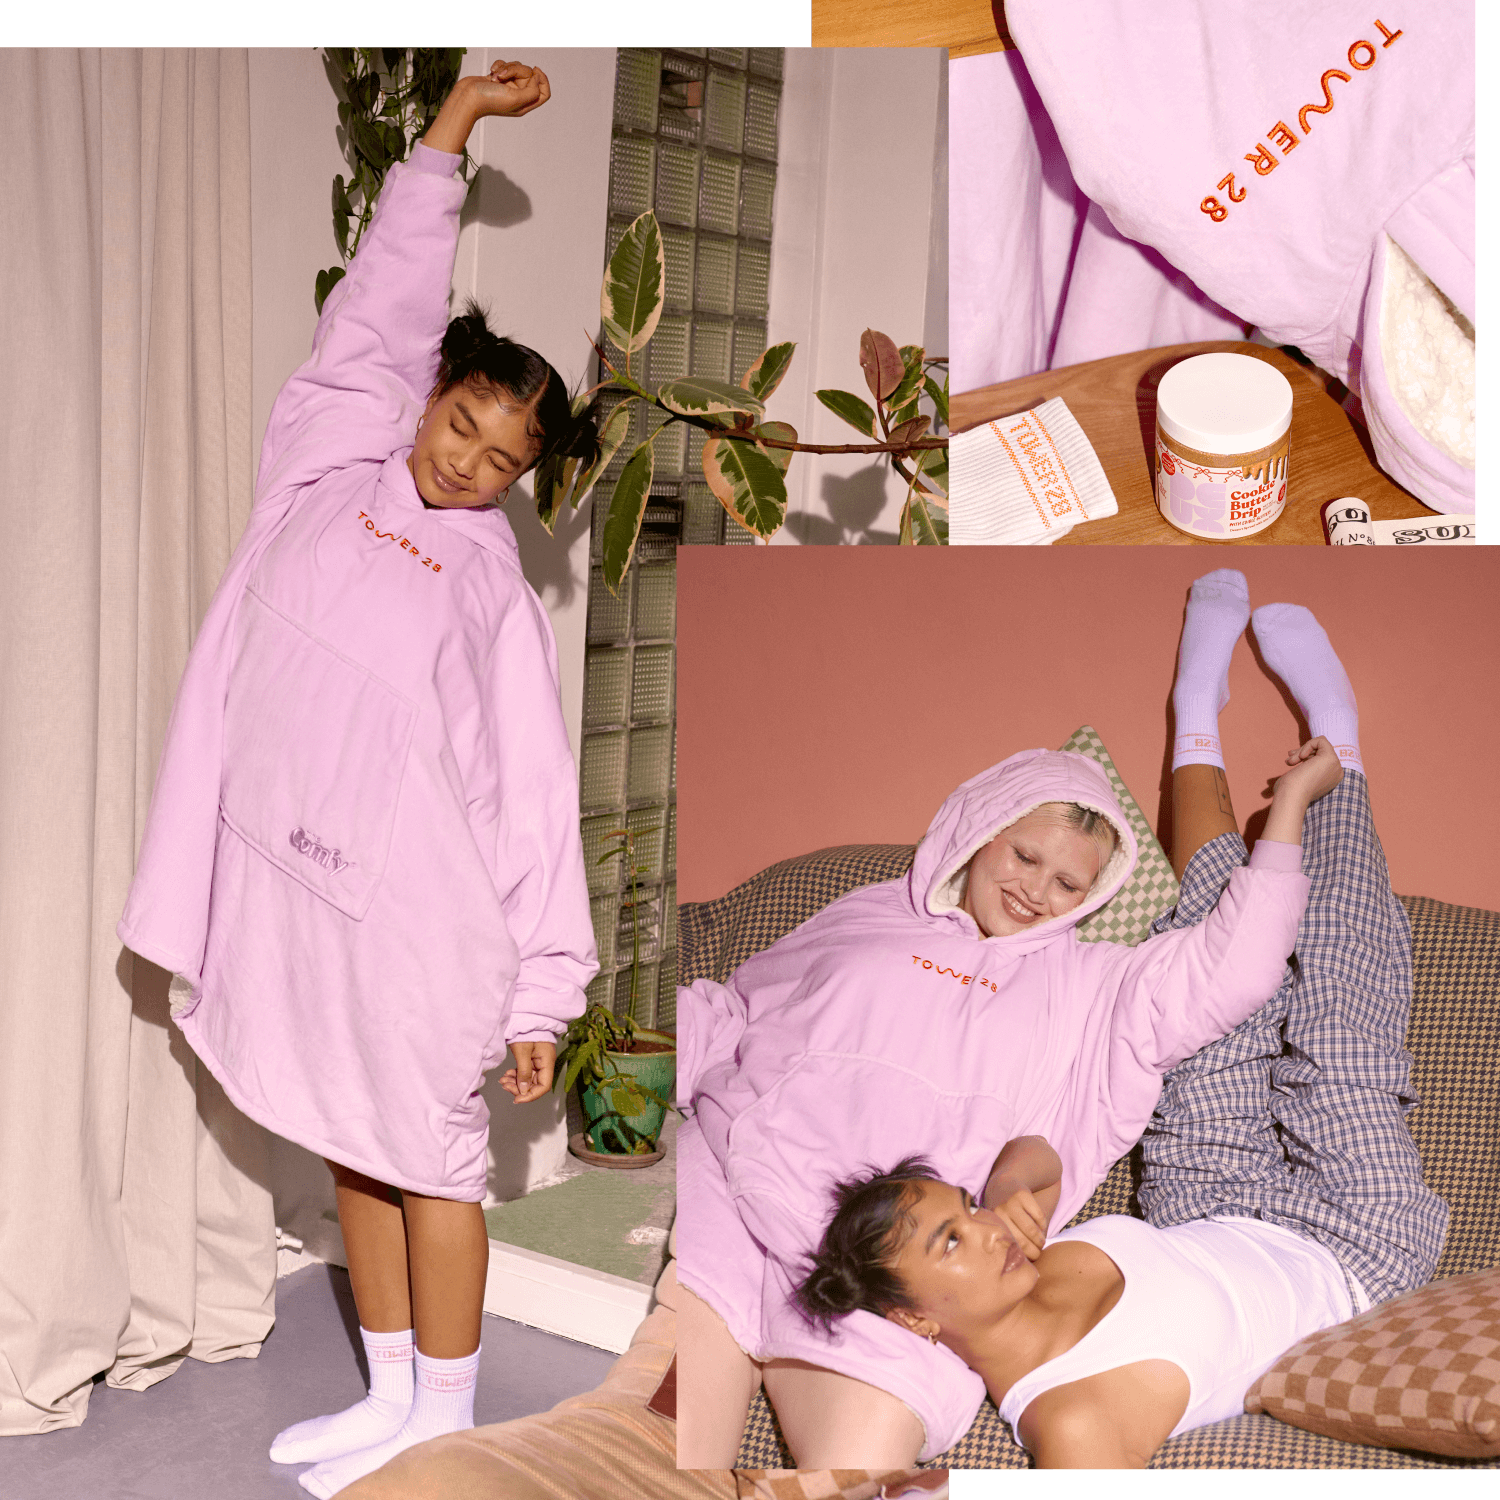 [Shared: A collage of images showing two models lounging in Tower 28 Beauty x Comfy® Originals comfy and enjoying Tower 28 Beauty x Deux Cookie Butter Drip.